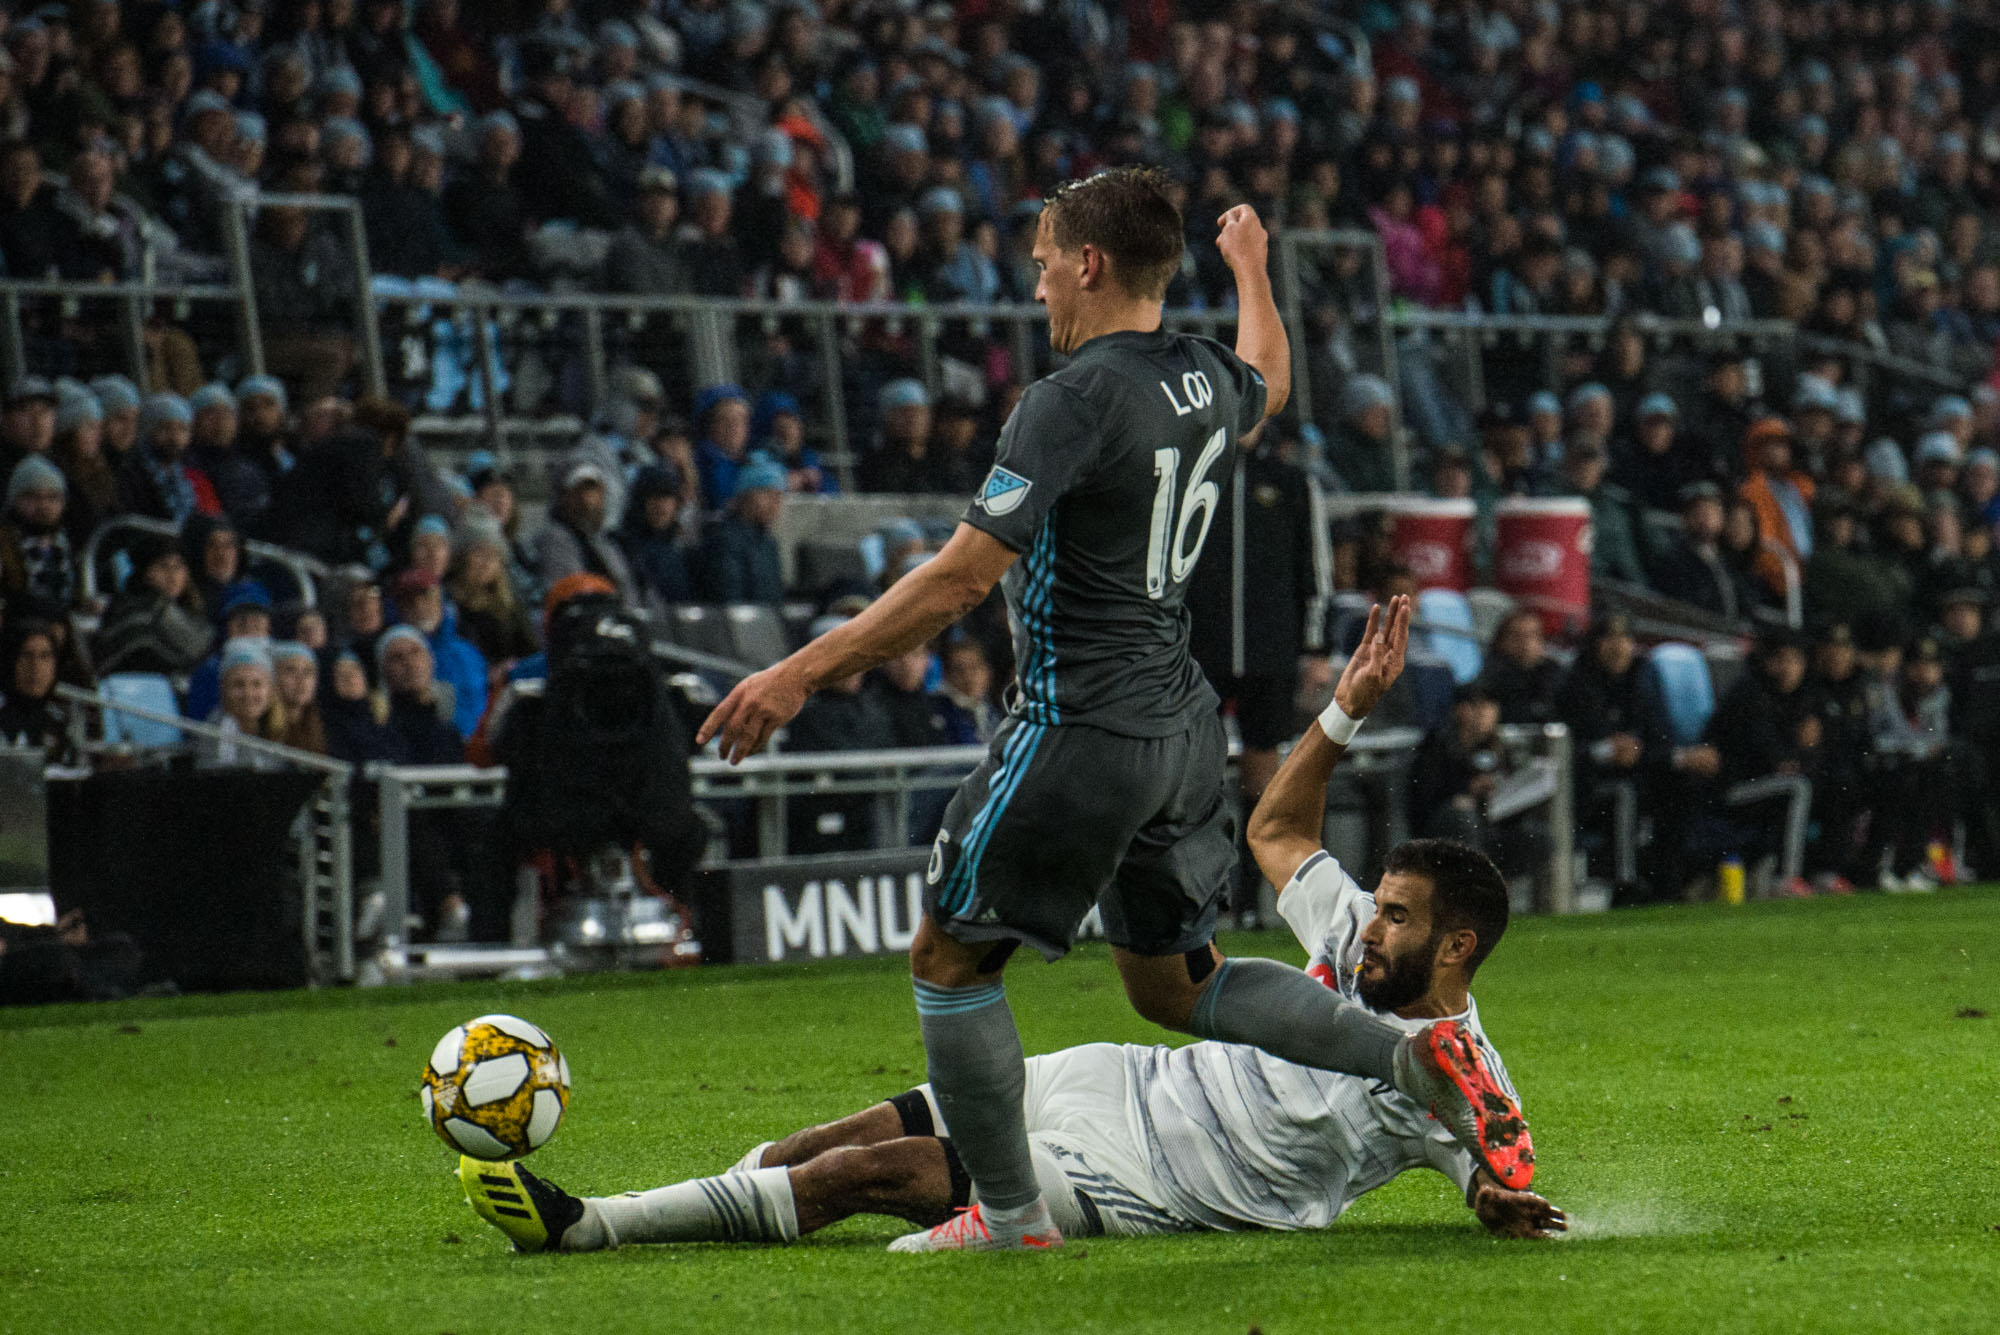 September 29, 2019 - Saint Paul, Minnesota, United States -Robin Lod tries to get to a ball during an MLS match between Minnesota United and Los Angeles Football Club at Allianz Field (Photo: Tim C McLaughlin)